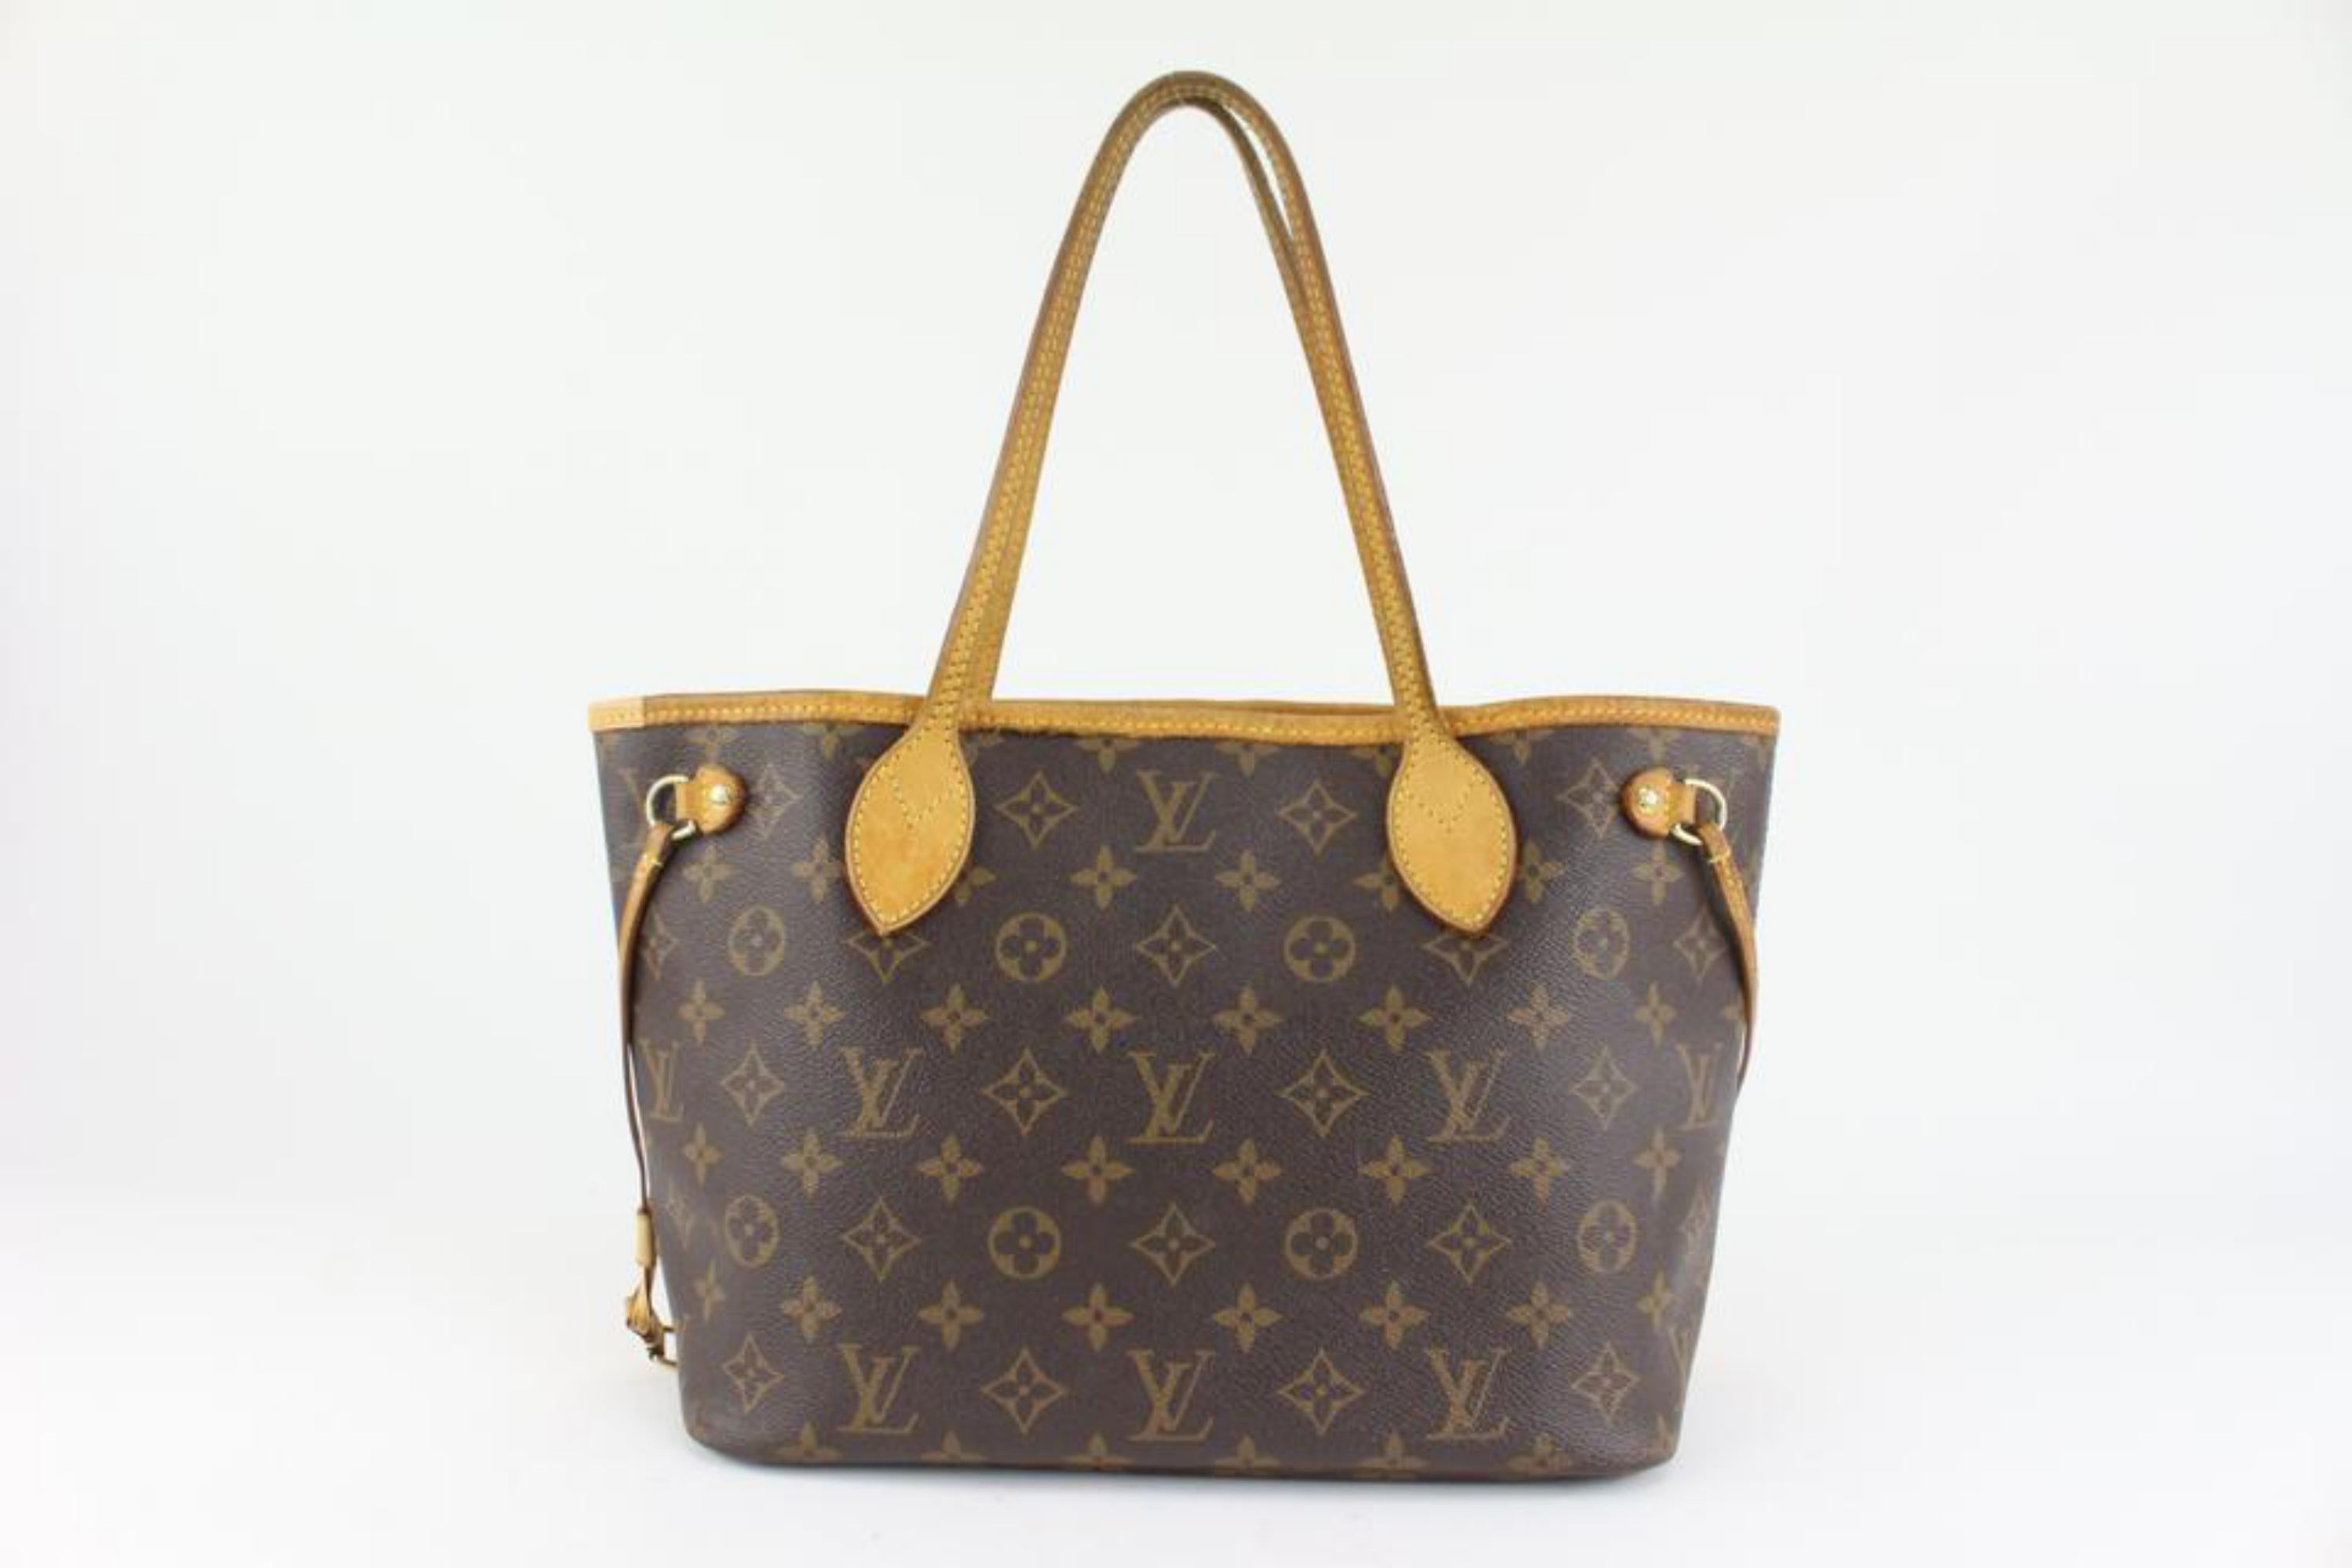 Louis Vuitton Small Monogram Neverfull PM Tote Bag 1215lv6 In Fair Condition For Sale In Dix hills, NY